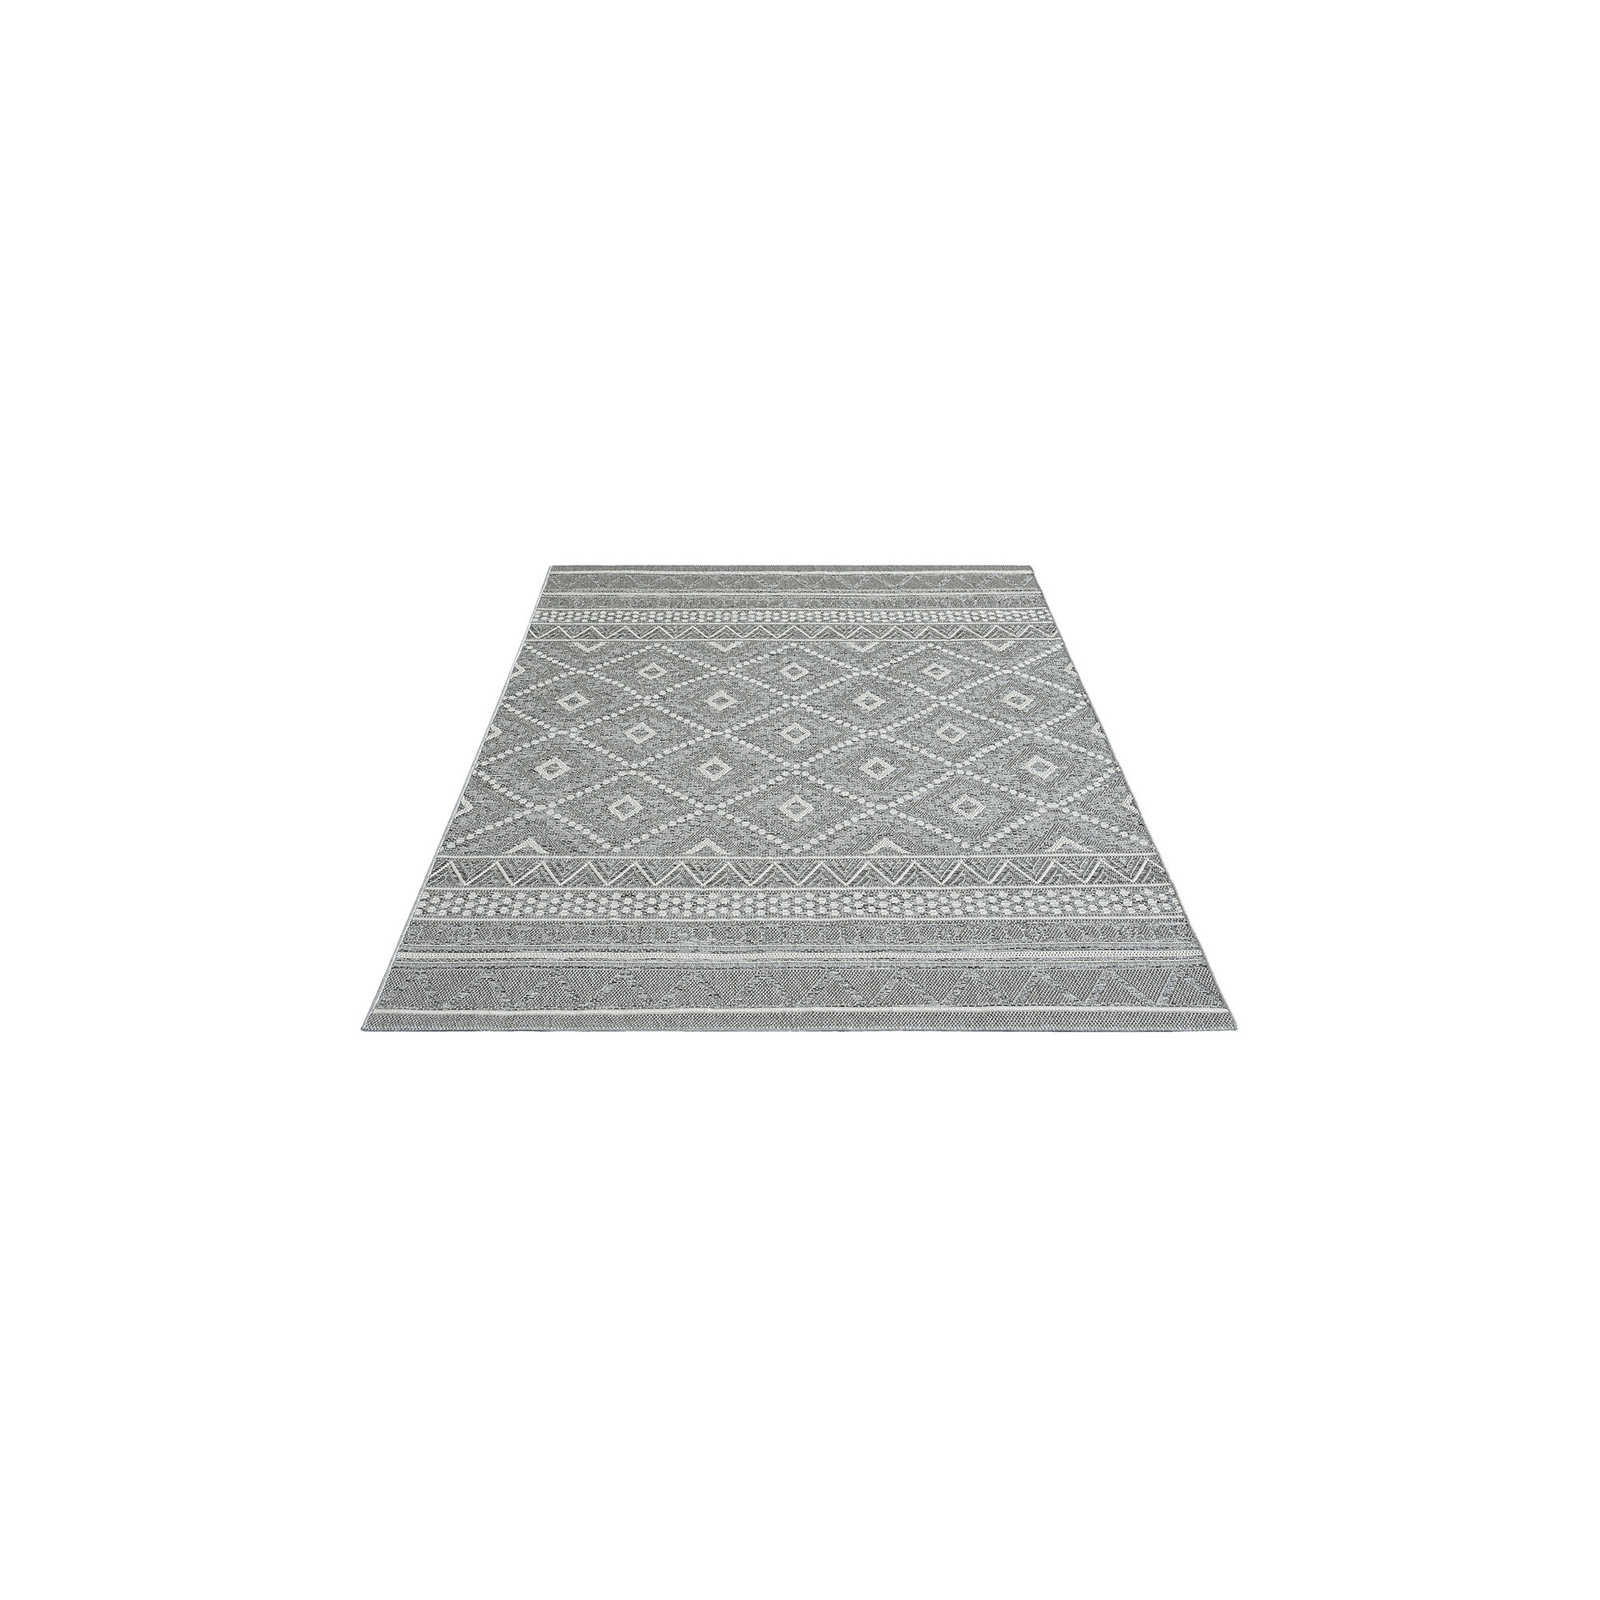 Patterned Outdoor Rug in Grey - 160 x 120 cm
